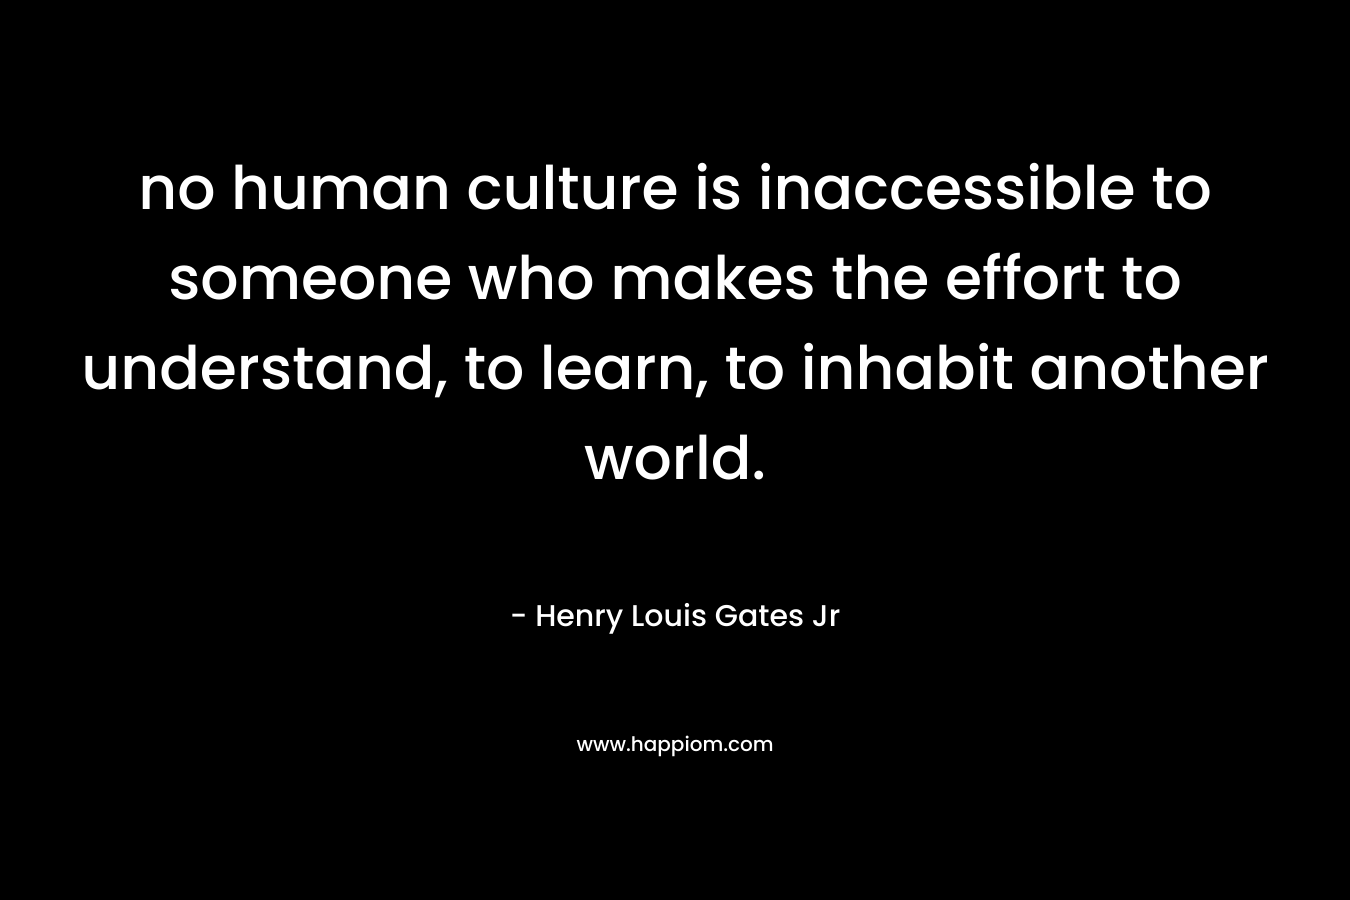 no human culture is inaccessible to someone who makes the effort to understand, to learn, to inhabit another world. – Henry Louis Gates Jr